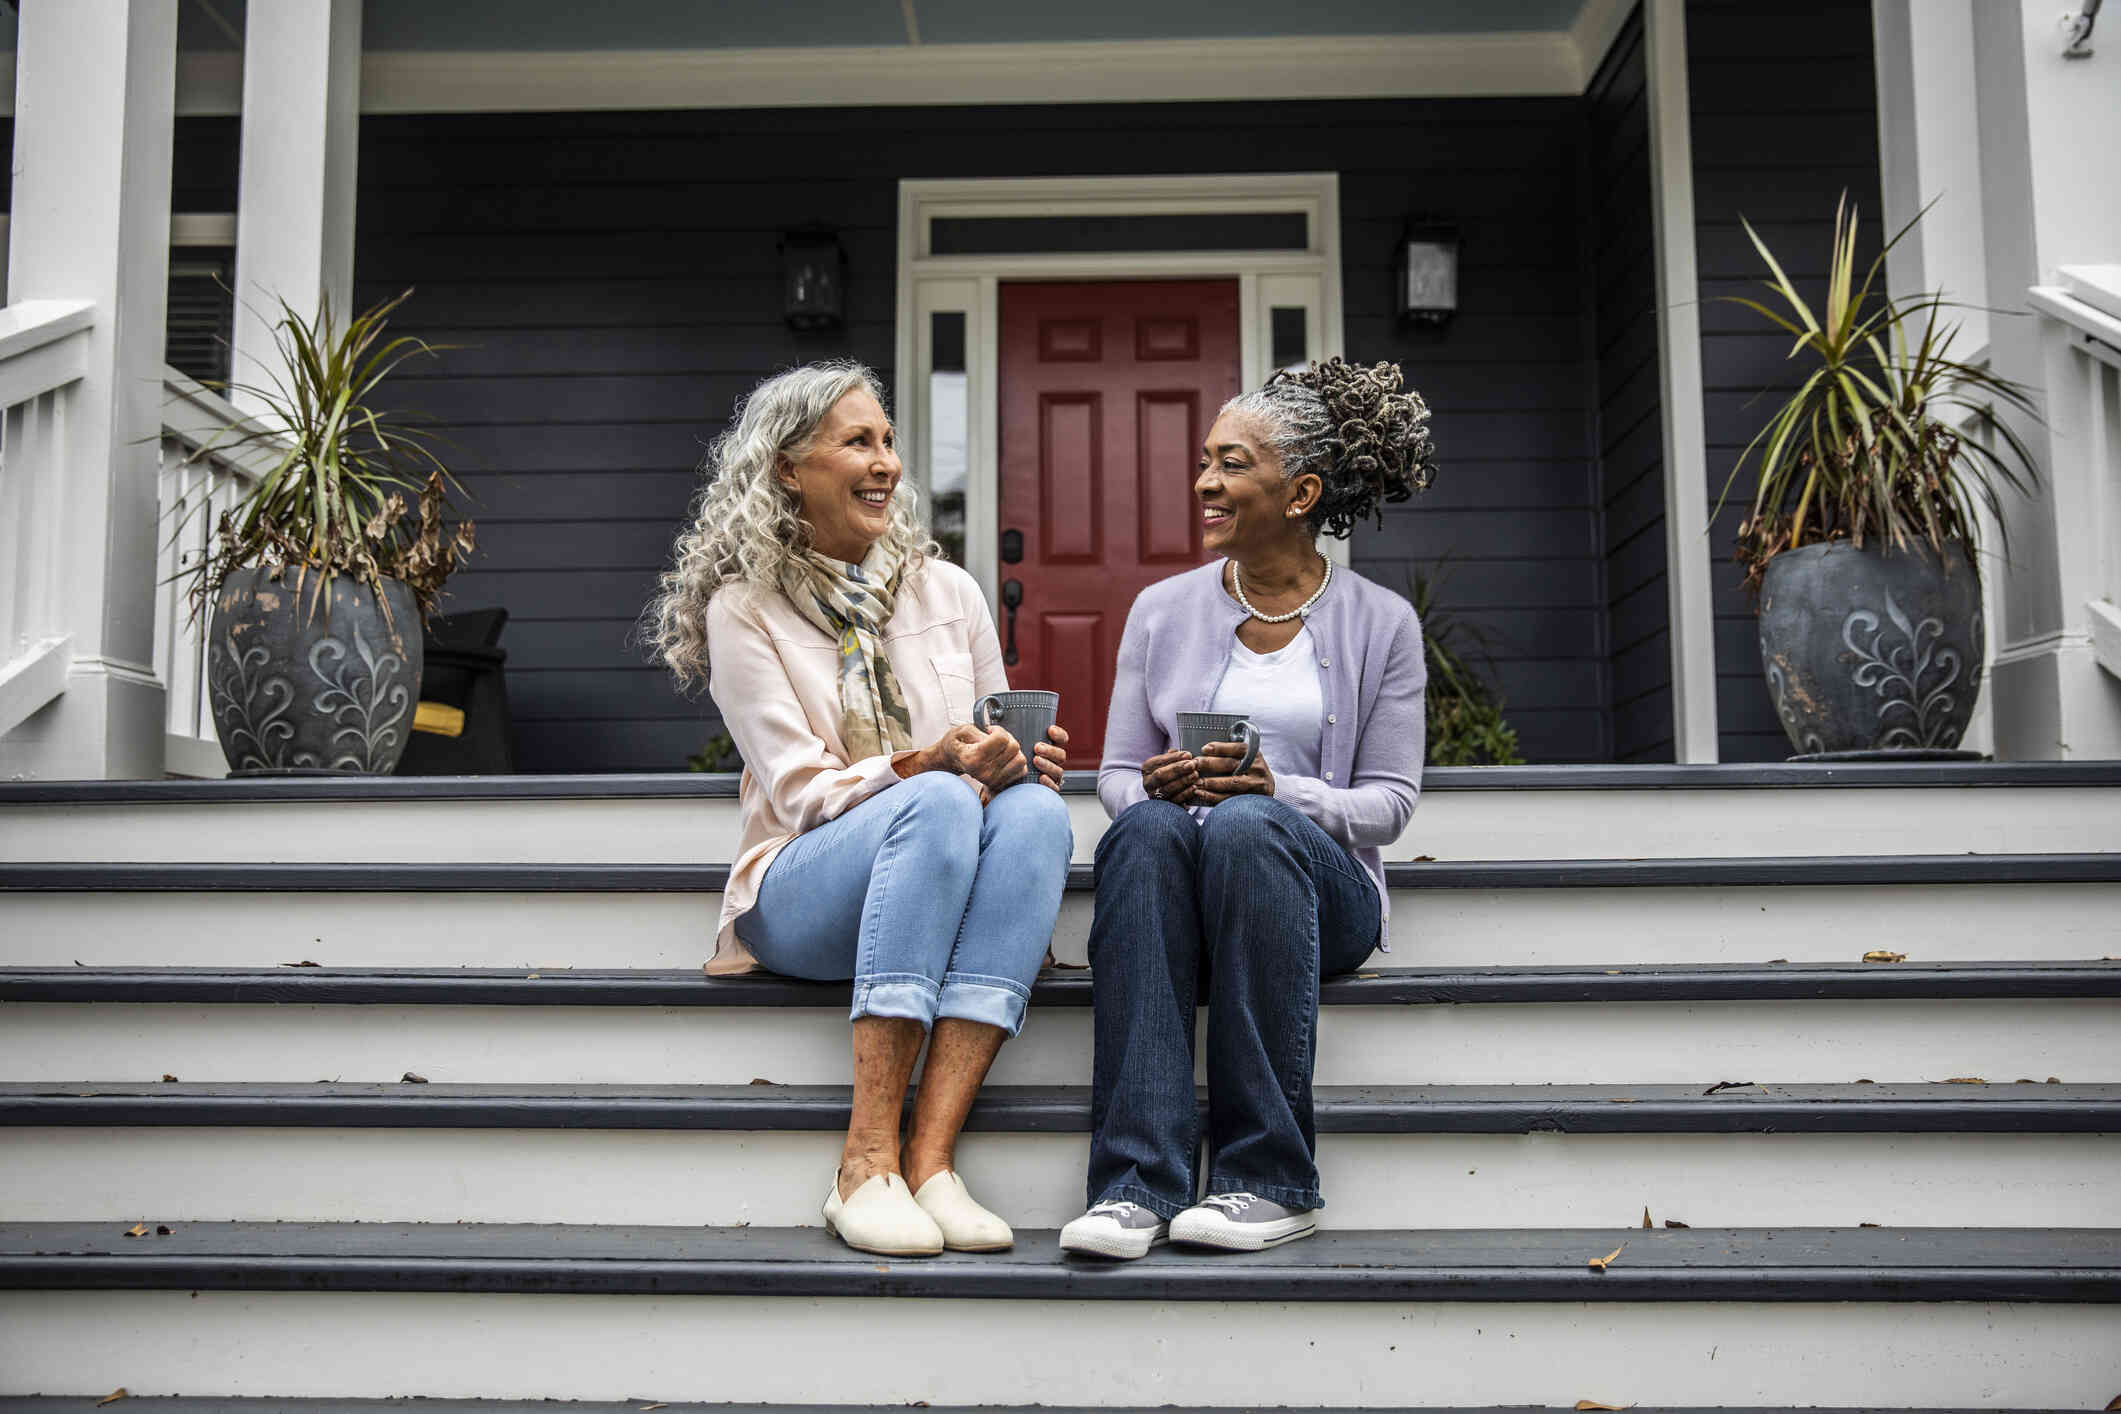 Two mature woman sit on the front porch steps and smile at one another while talking.